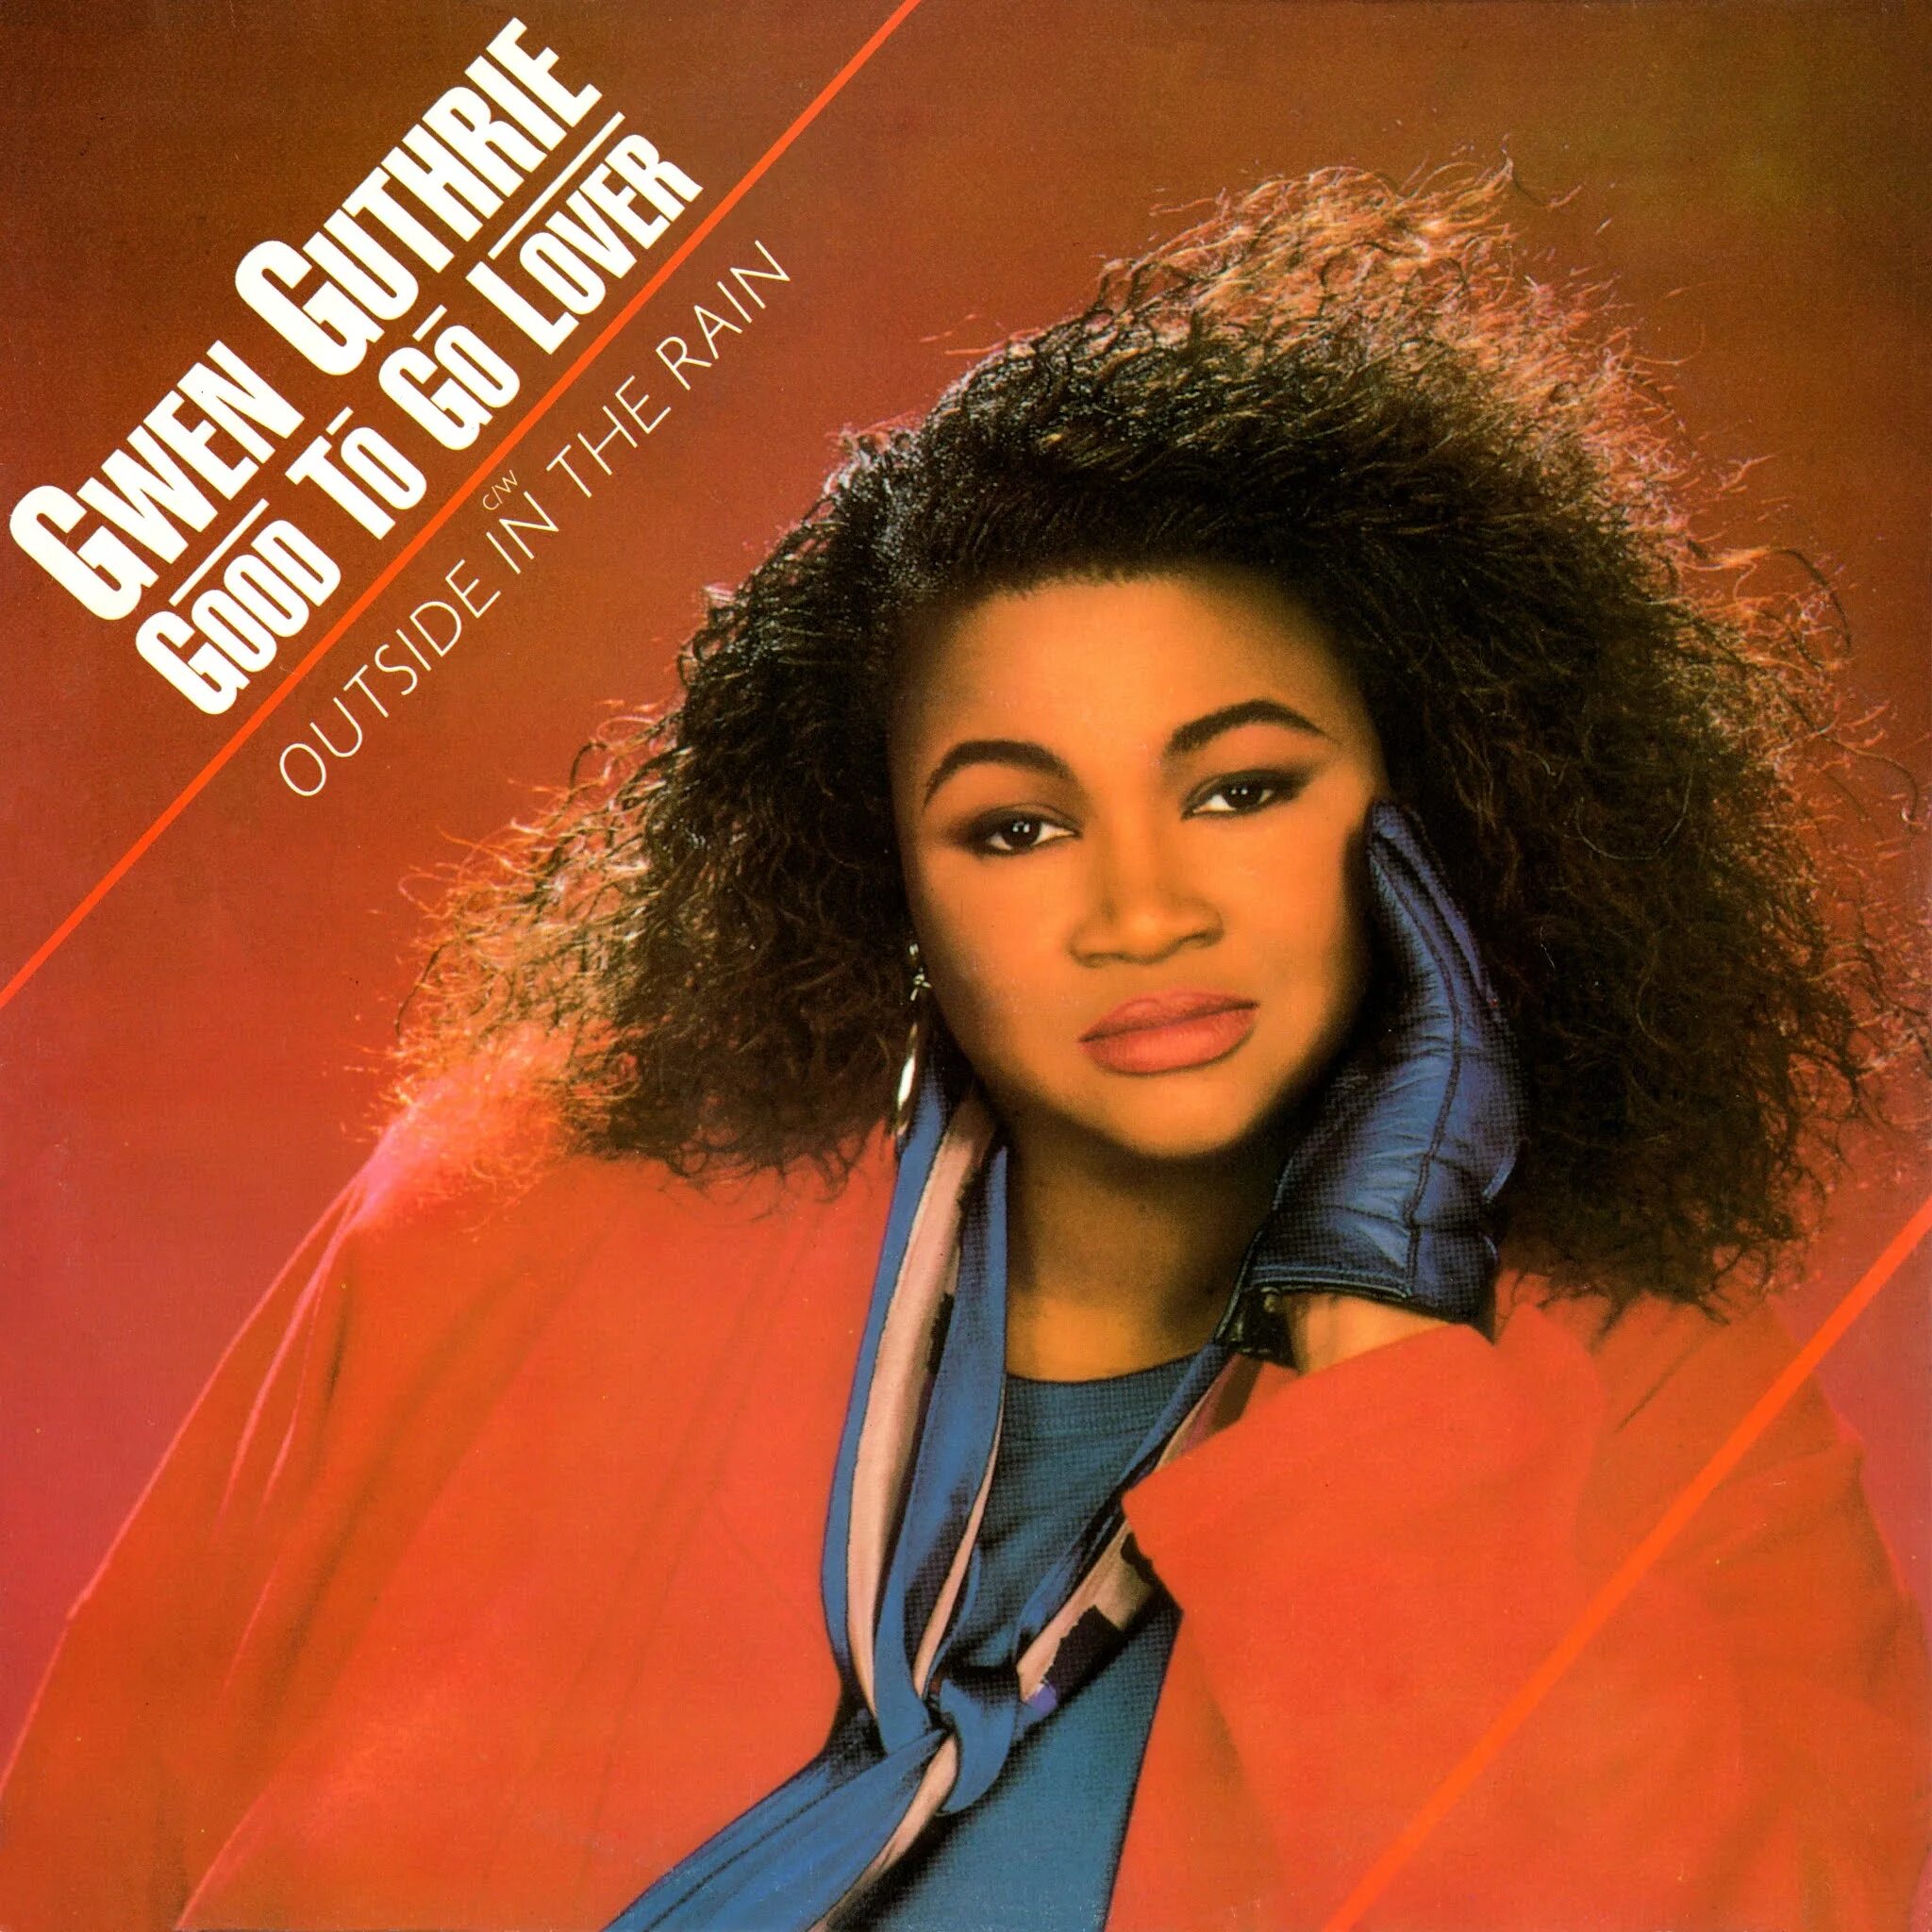 Take a love to go. Gwen Guthrie - good to go lover (1986) фото. Gwen Guthrie - the best of (1982-1990) фото. I can't feel it no more Gwen Guthrie. Vinyl lover 2.